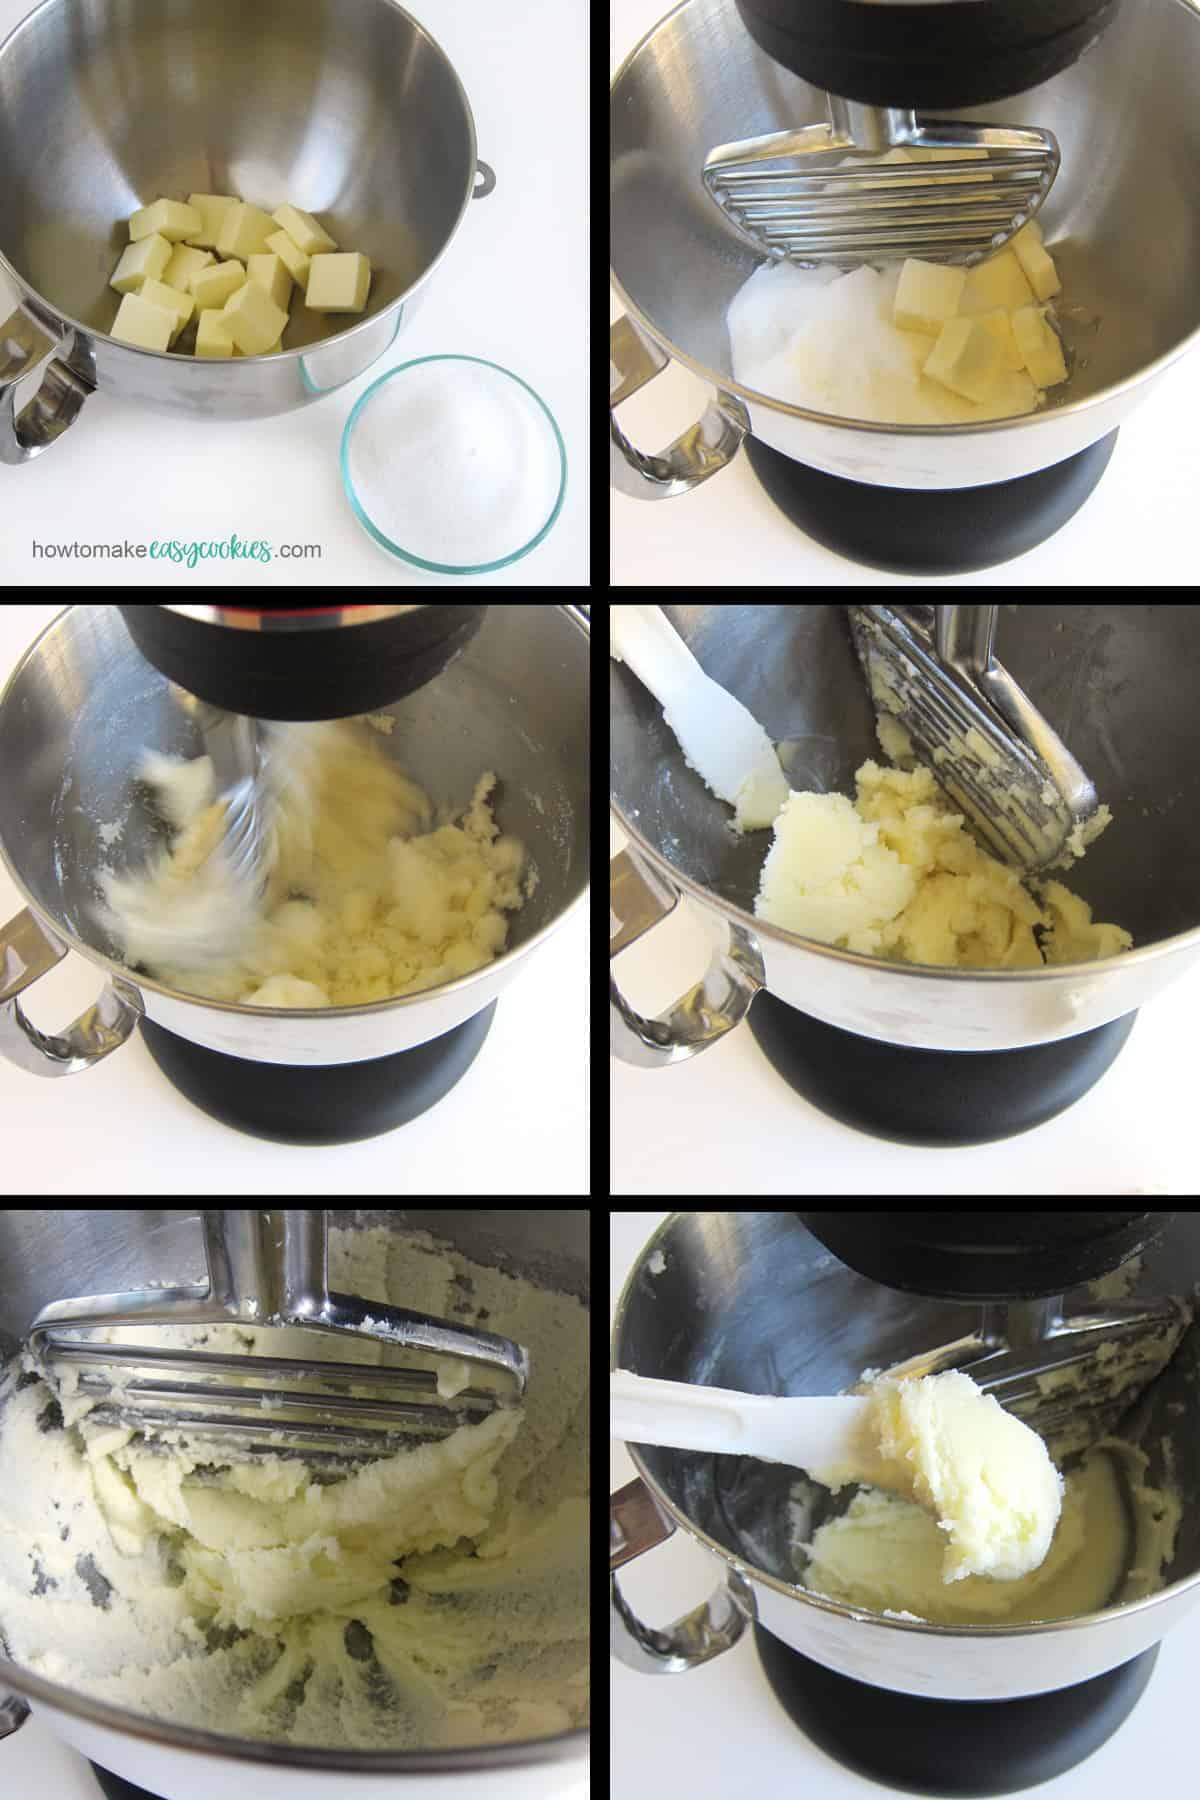 how to cream butter and sugar to make cut-out sugar cookies